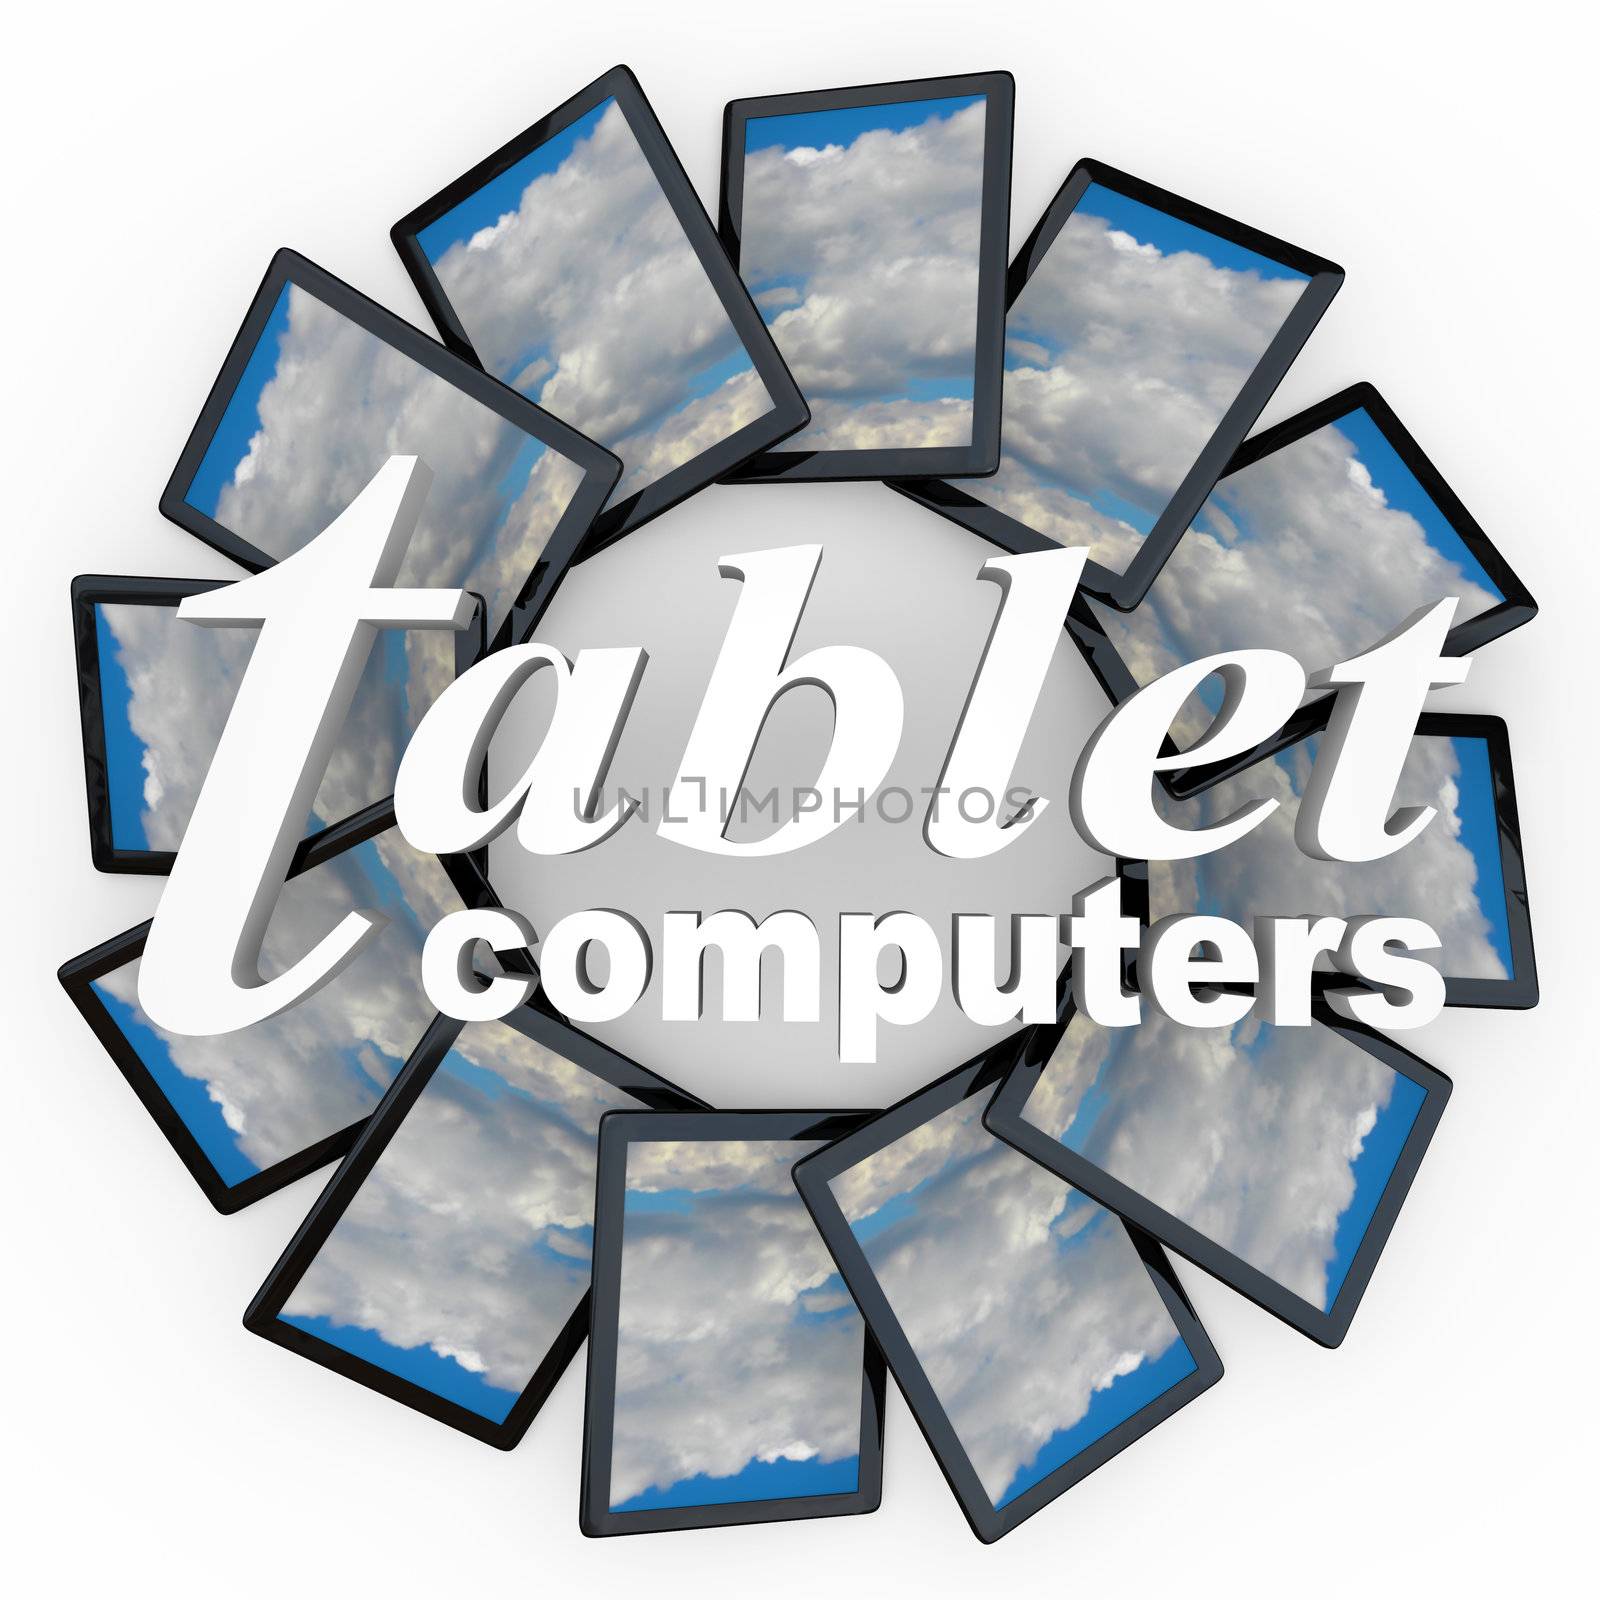 Several tablet computers in a circular pattern representing the latest technology devices to help you with web browsing, applications, reading digital books and more